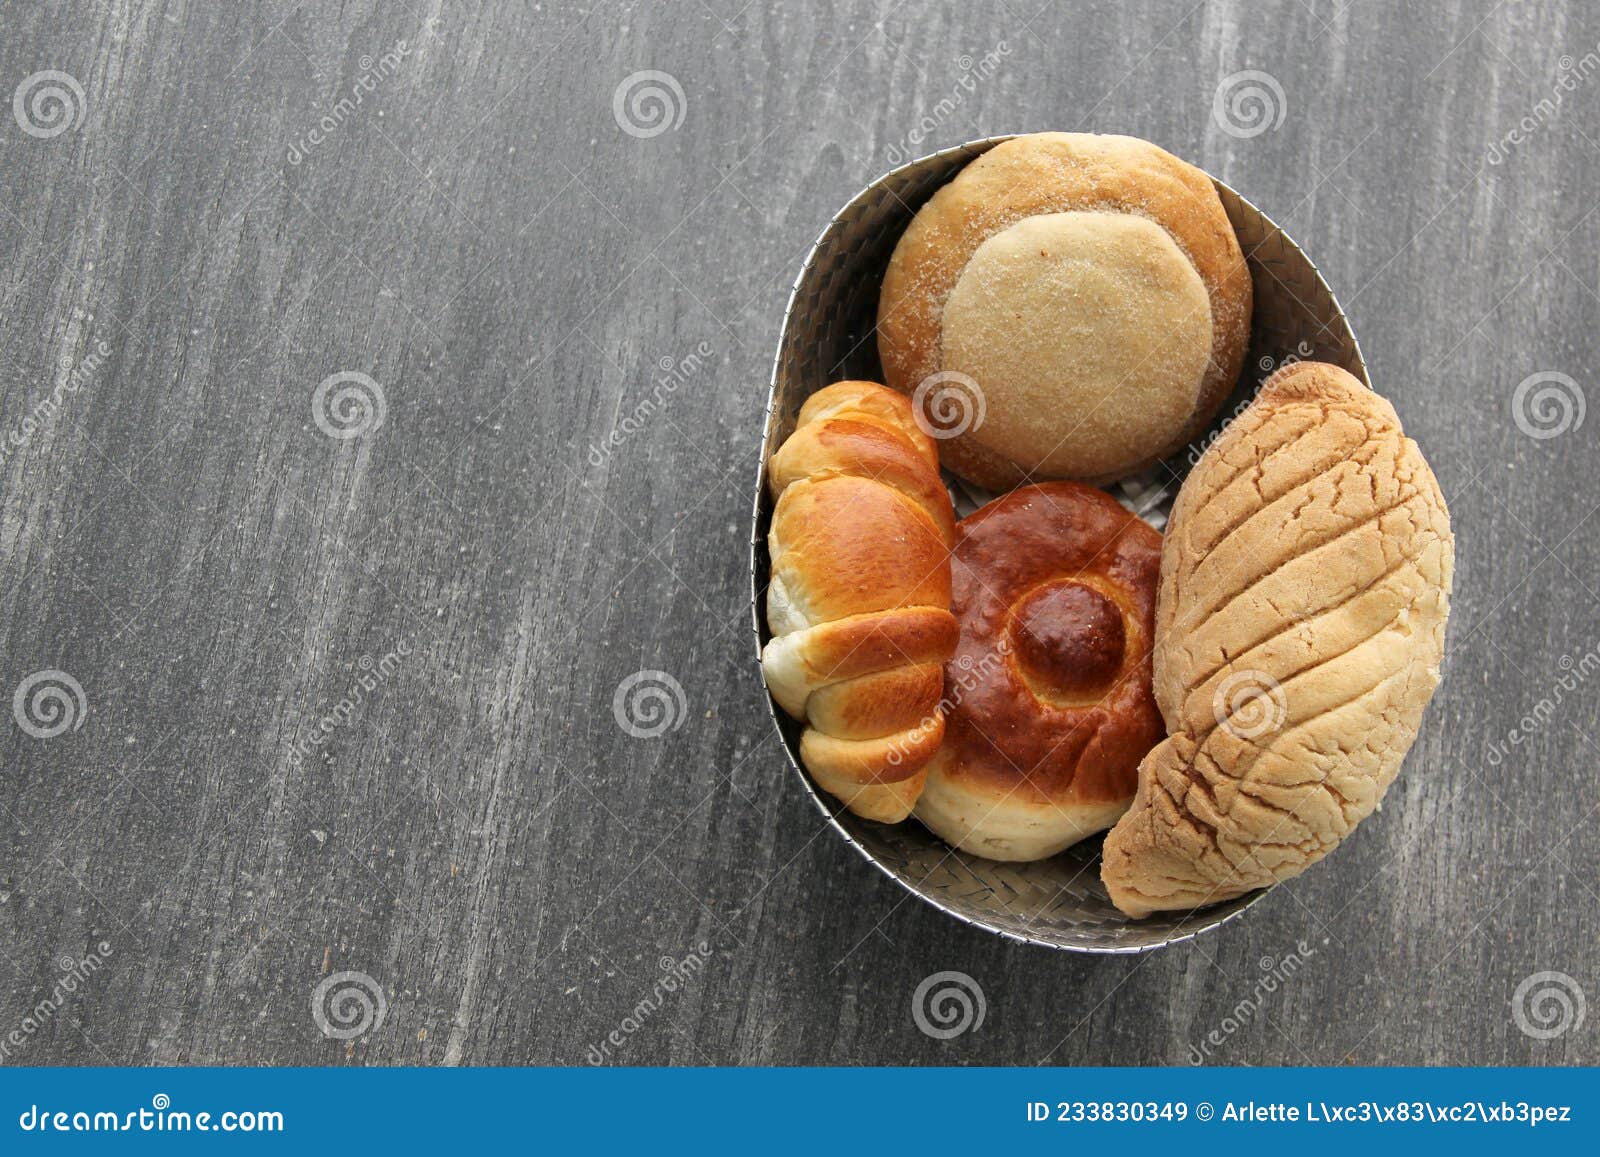 sweet bread: bisquet, croissant, ojo de pancha and gusano freshly made from mexican cuisine in a basket, or napkin accompanied by